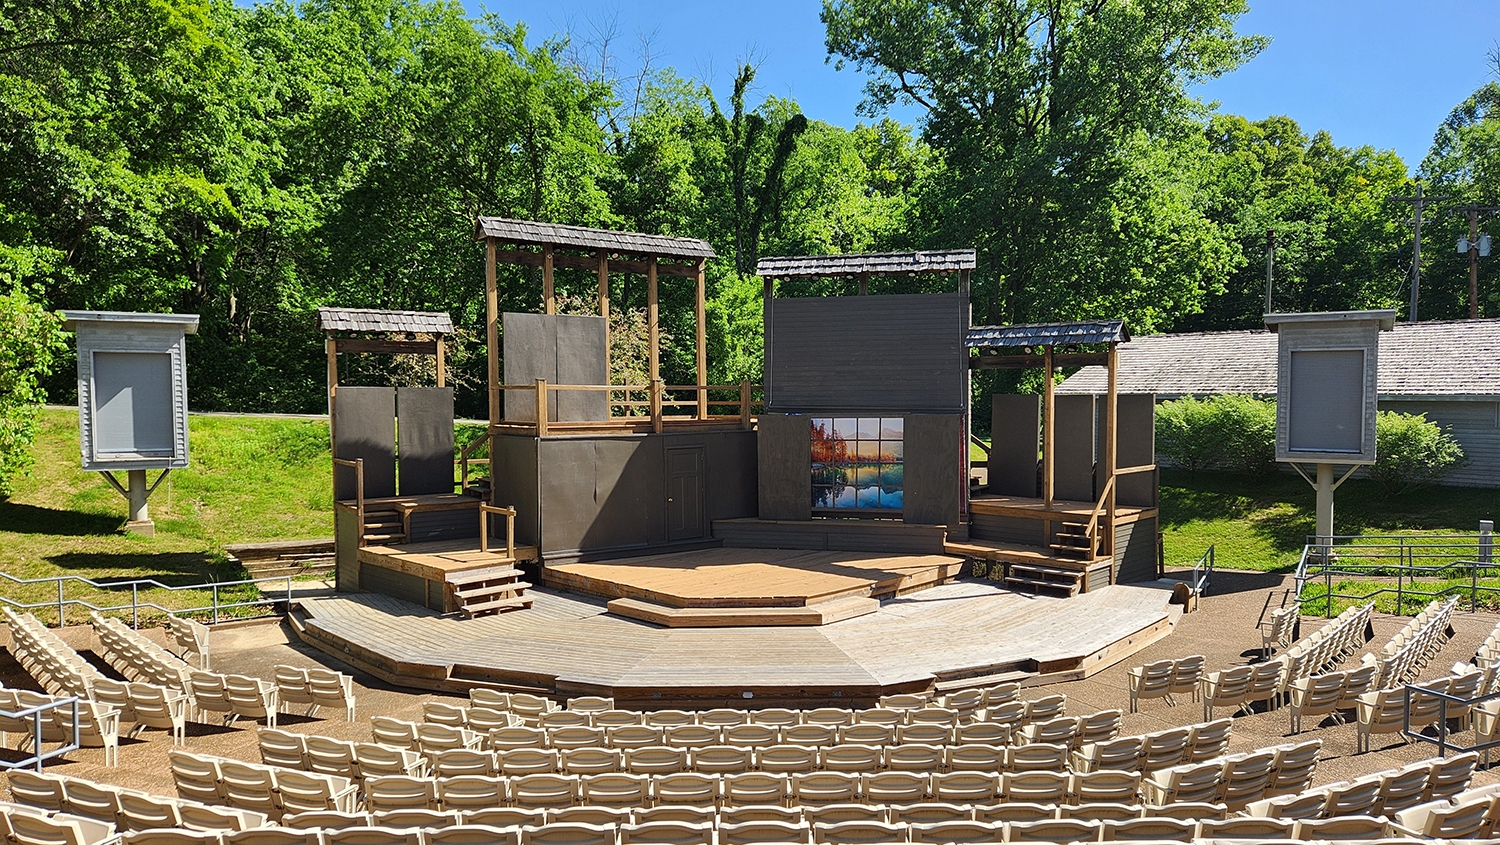 Illinois State Theater – The Great American People Show, Lincoln's New Salem State Historic Site